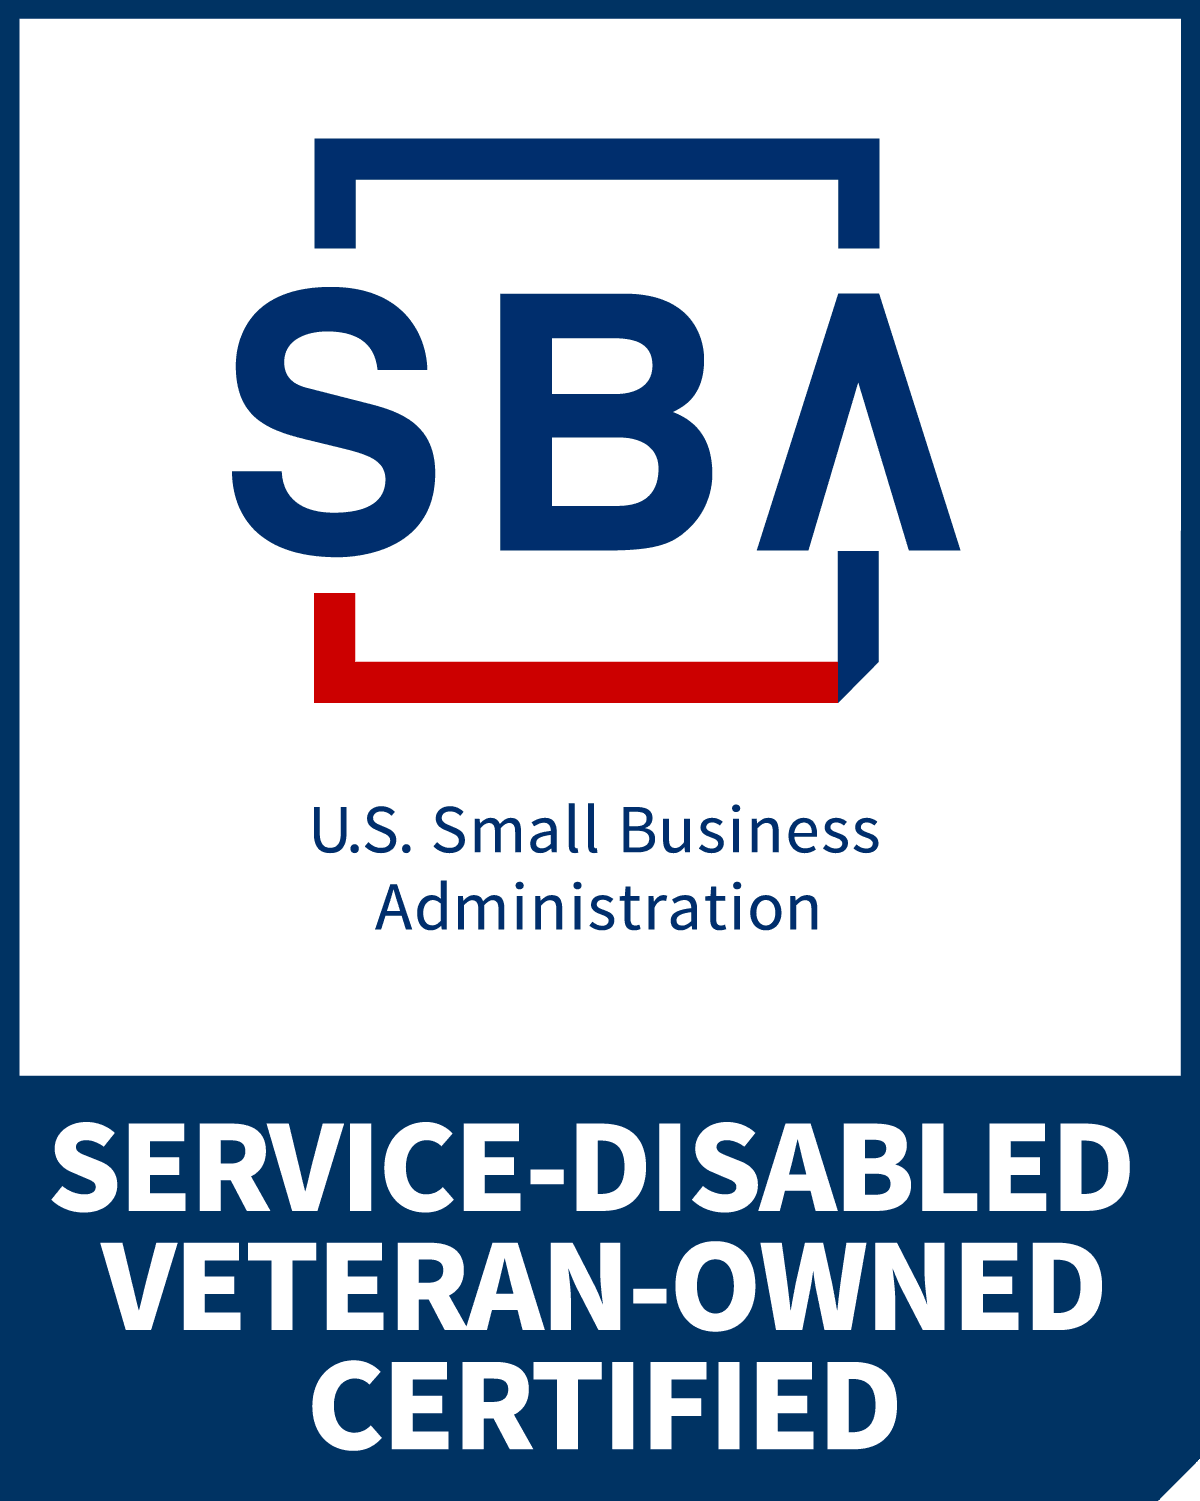 Service-Disabled-Veteran-Owned-Certified